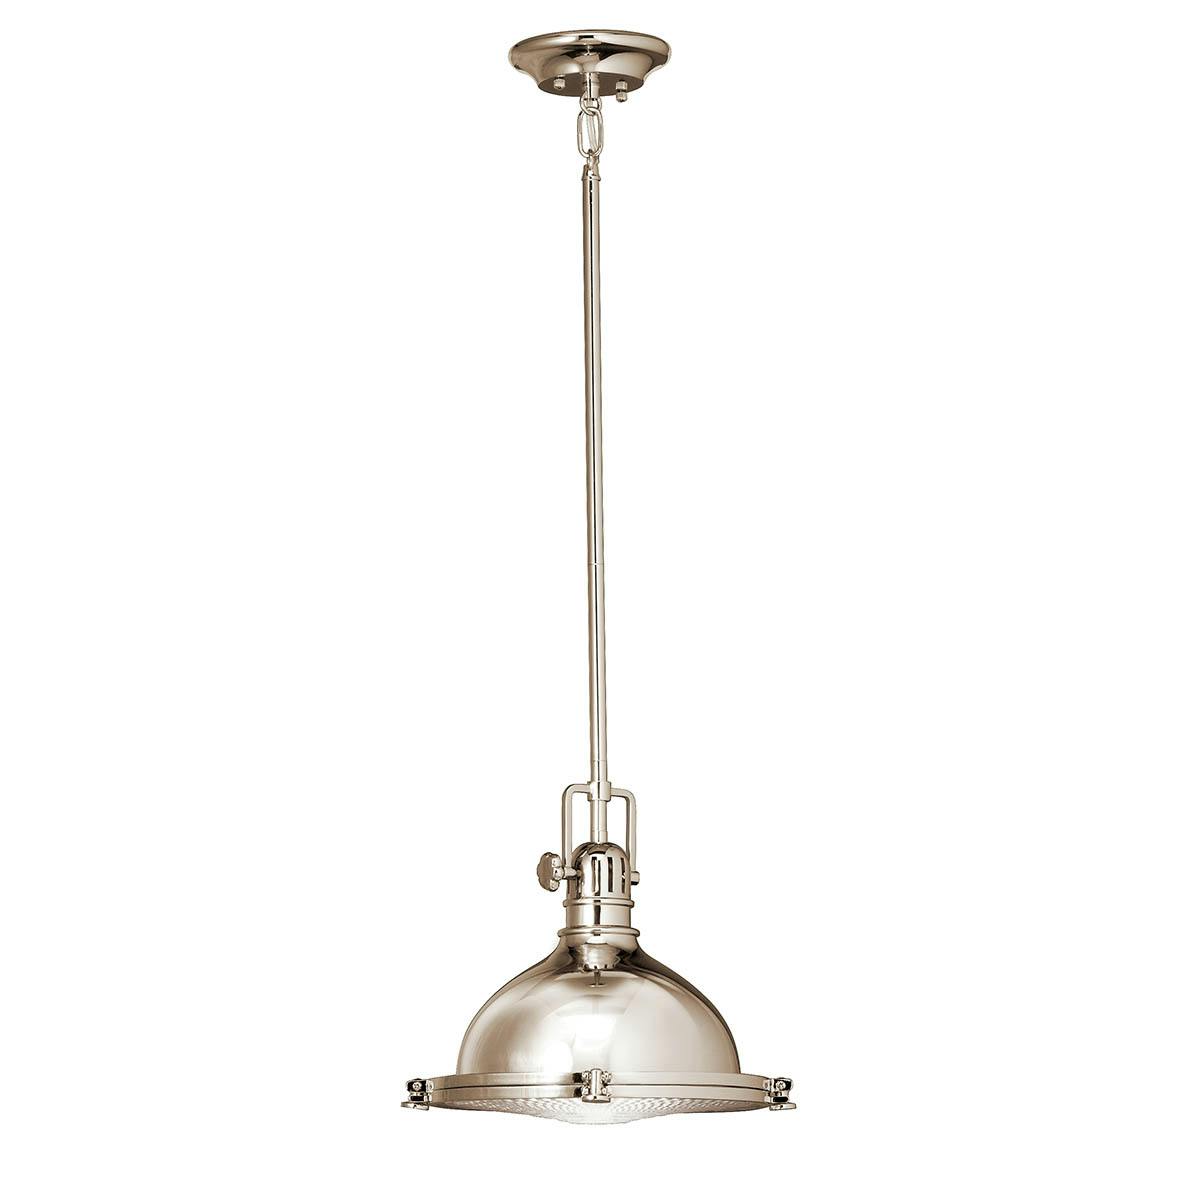 Hatteras Bay 11" Pendant Nickel on a white background